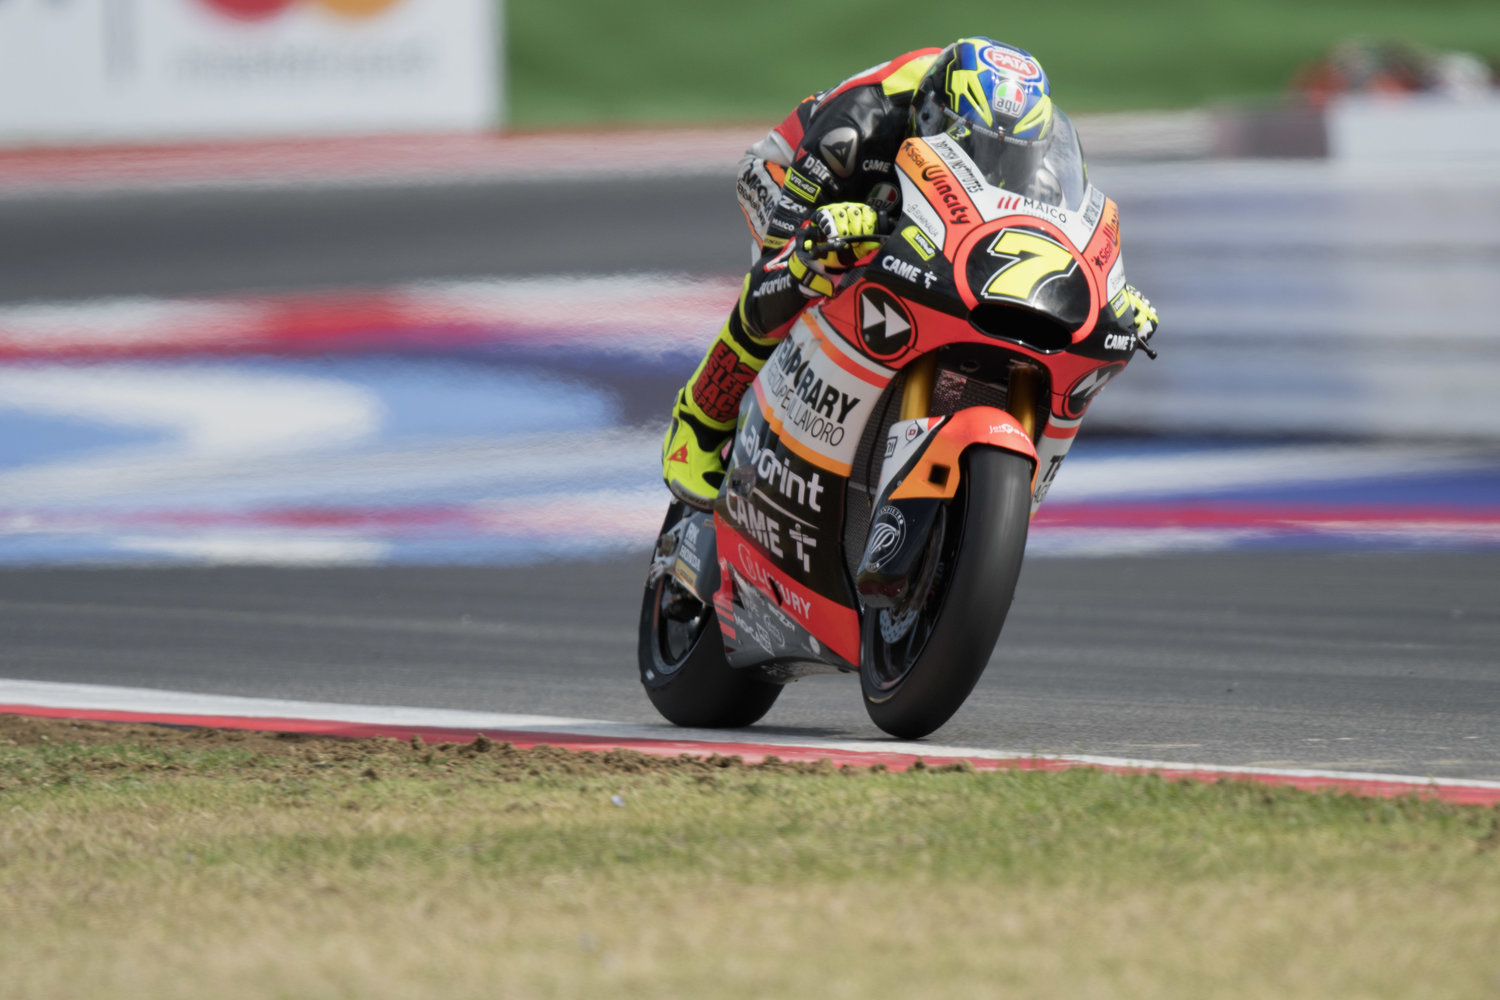 Baldassarri attacks at home from fabulous fourth, Marini shows strong qualifying